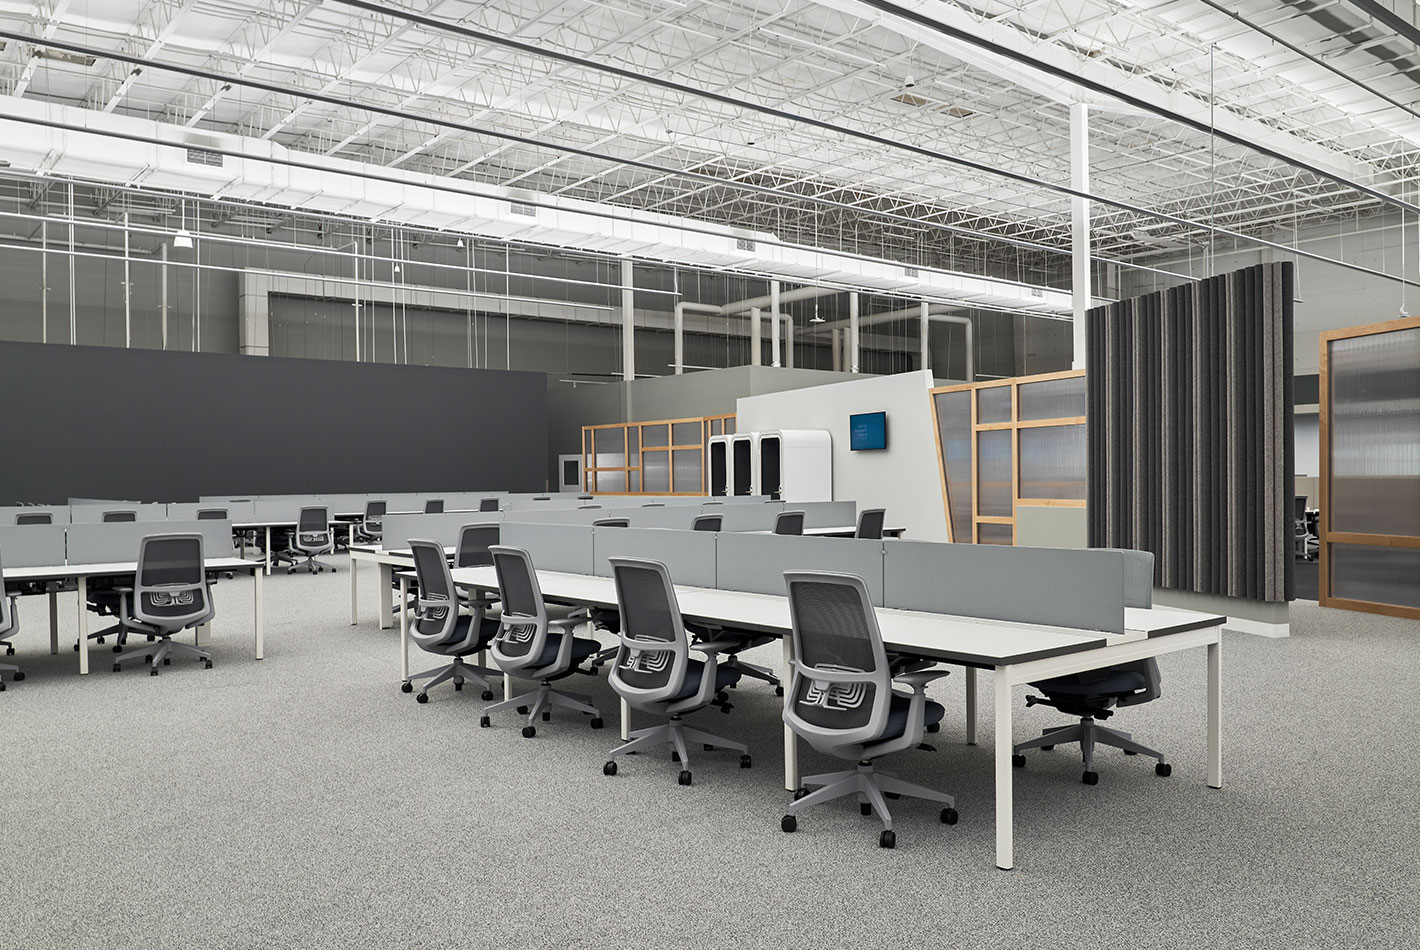 Multiple long, double sided desks for workers at Postmates Headquarters. The furnishings are in a color palette of white and soft grays